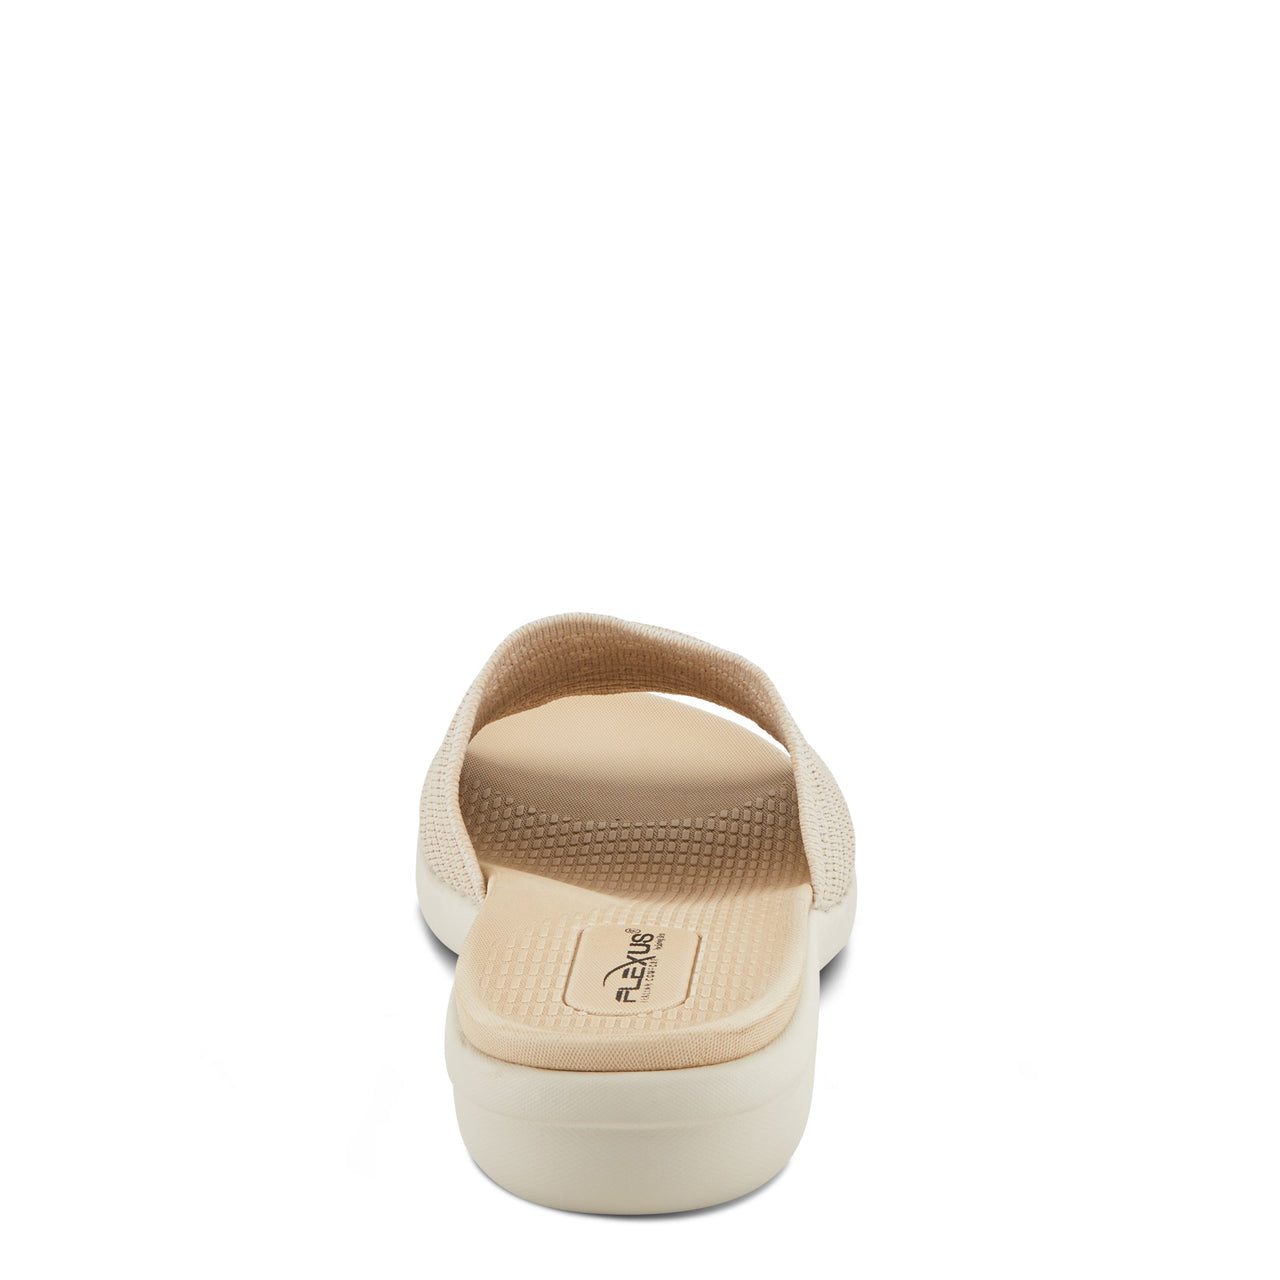 Spring Step Shoes Flexus Deondre Sandals in White leather with perforated design and slingback strap